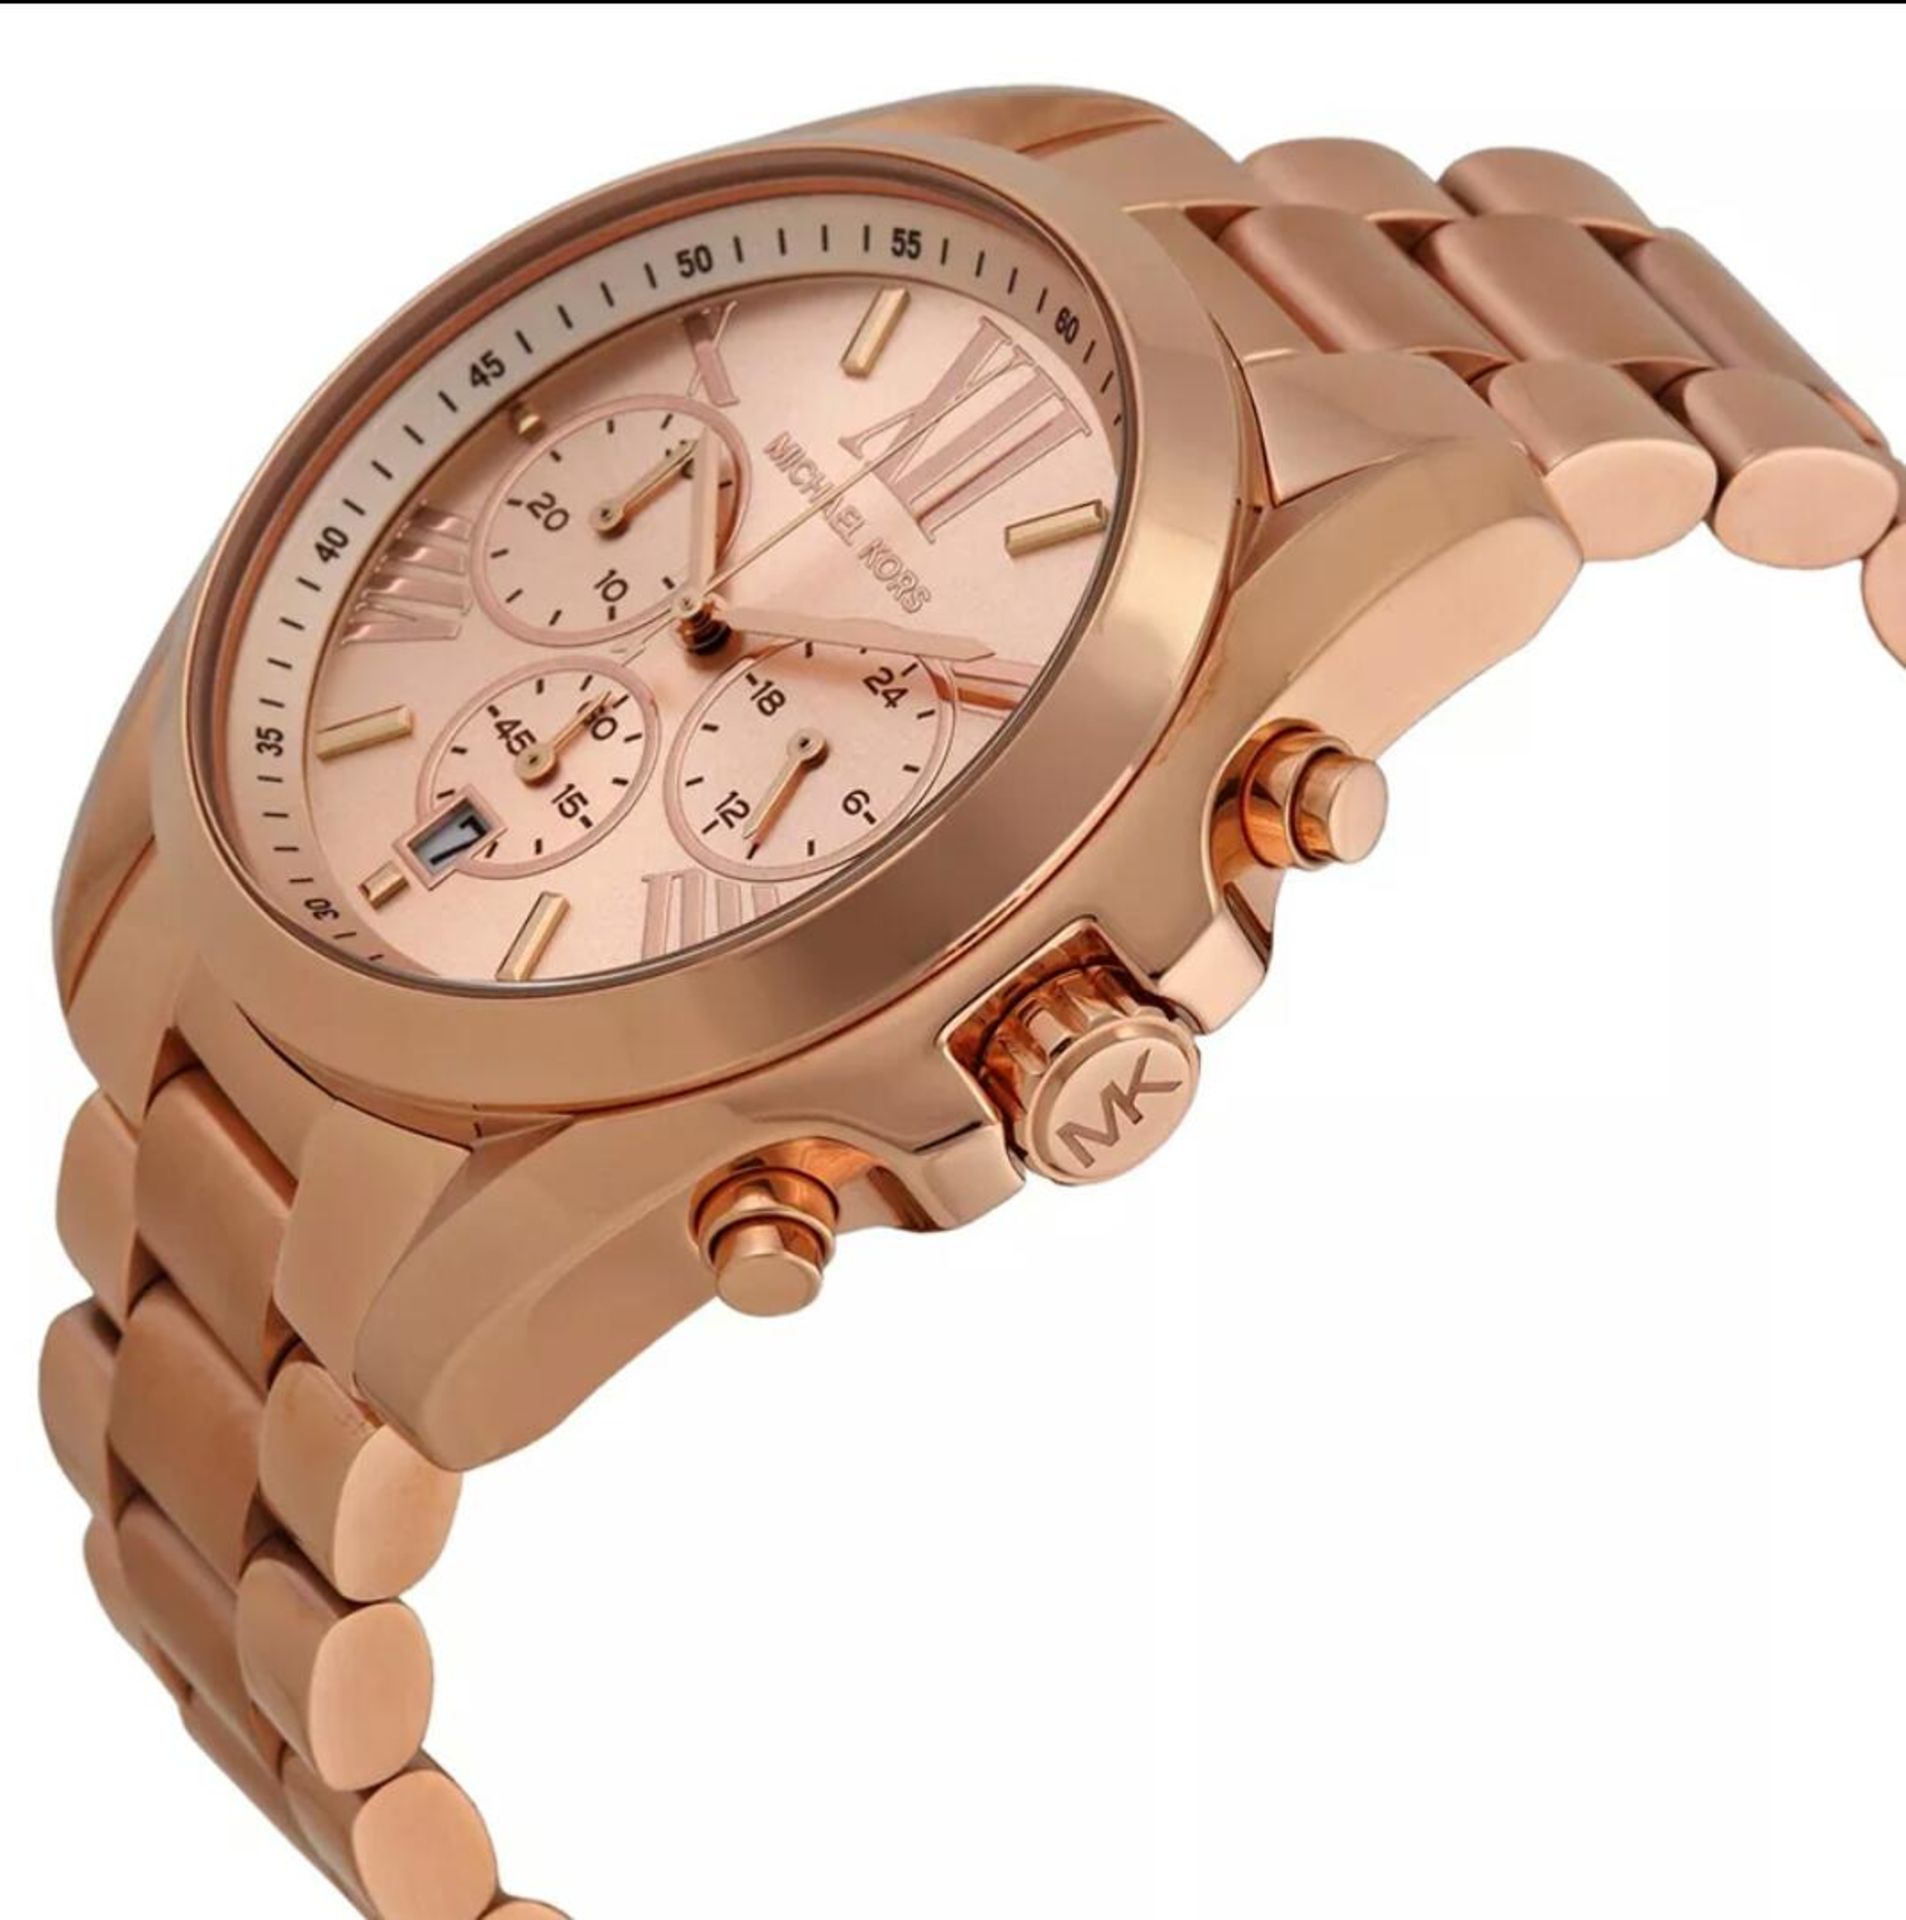 BRAND NEW LADIES MICHAEL KORS MK5503, COMPLETE WITH ORIGINAL PACKAGING AND MANUAL - Image 2 of 2